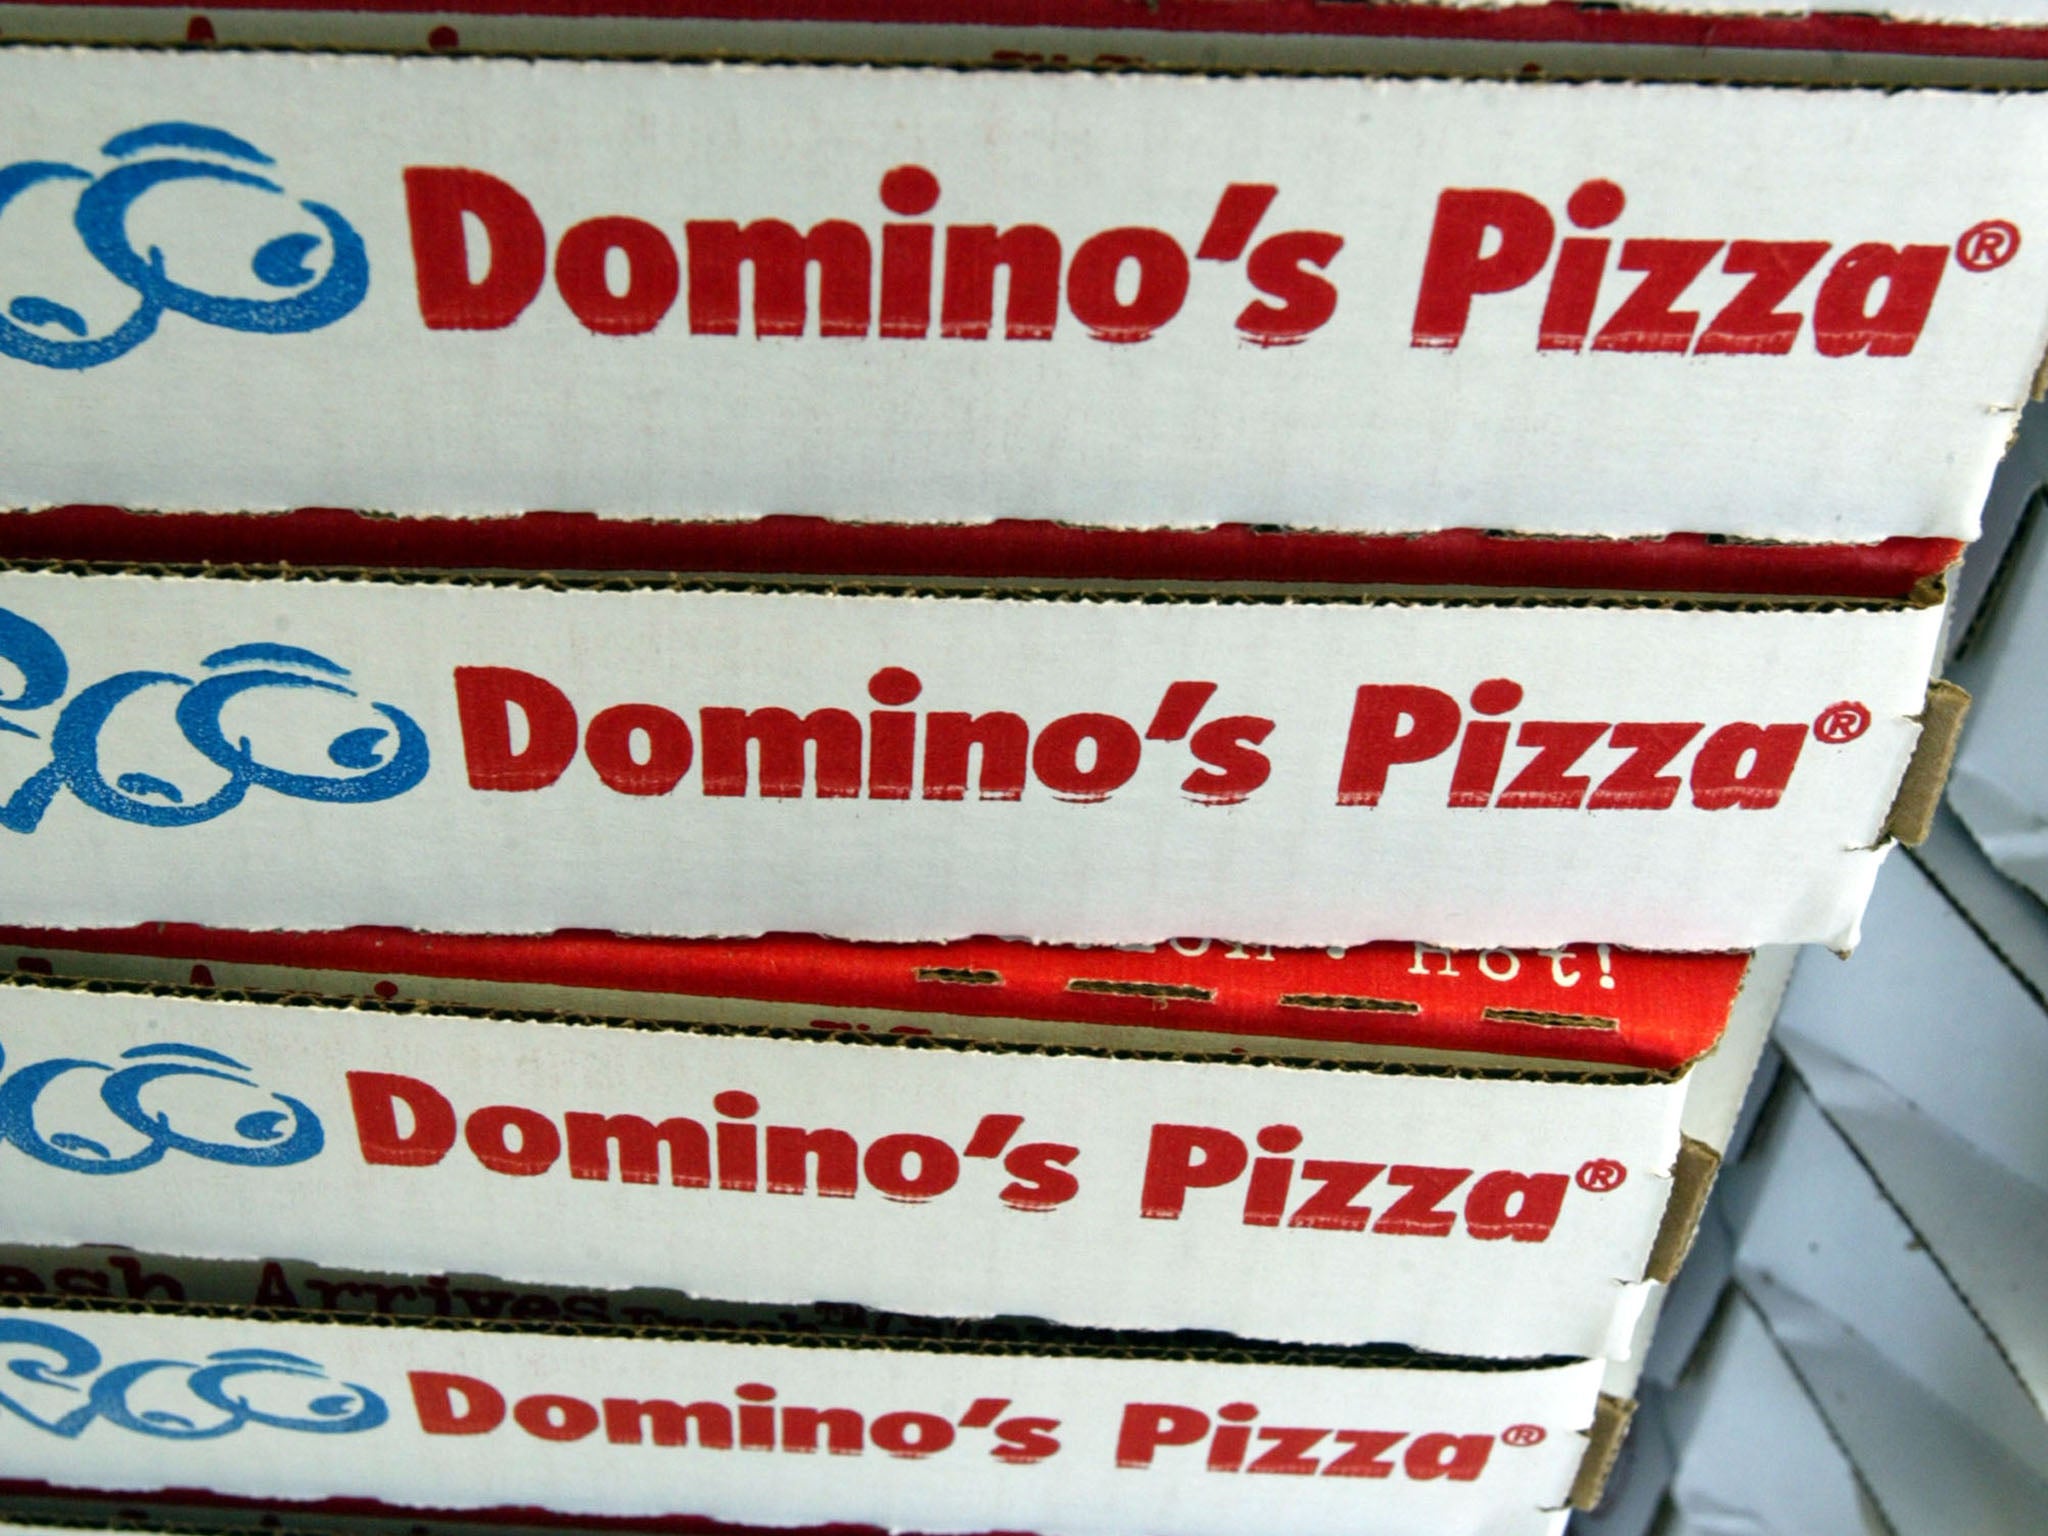 Domino's Pizzas has reported a pre-tax profit of £73.2 million compared with £62.1 million a year earlier